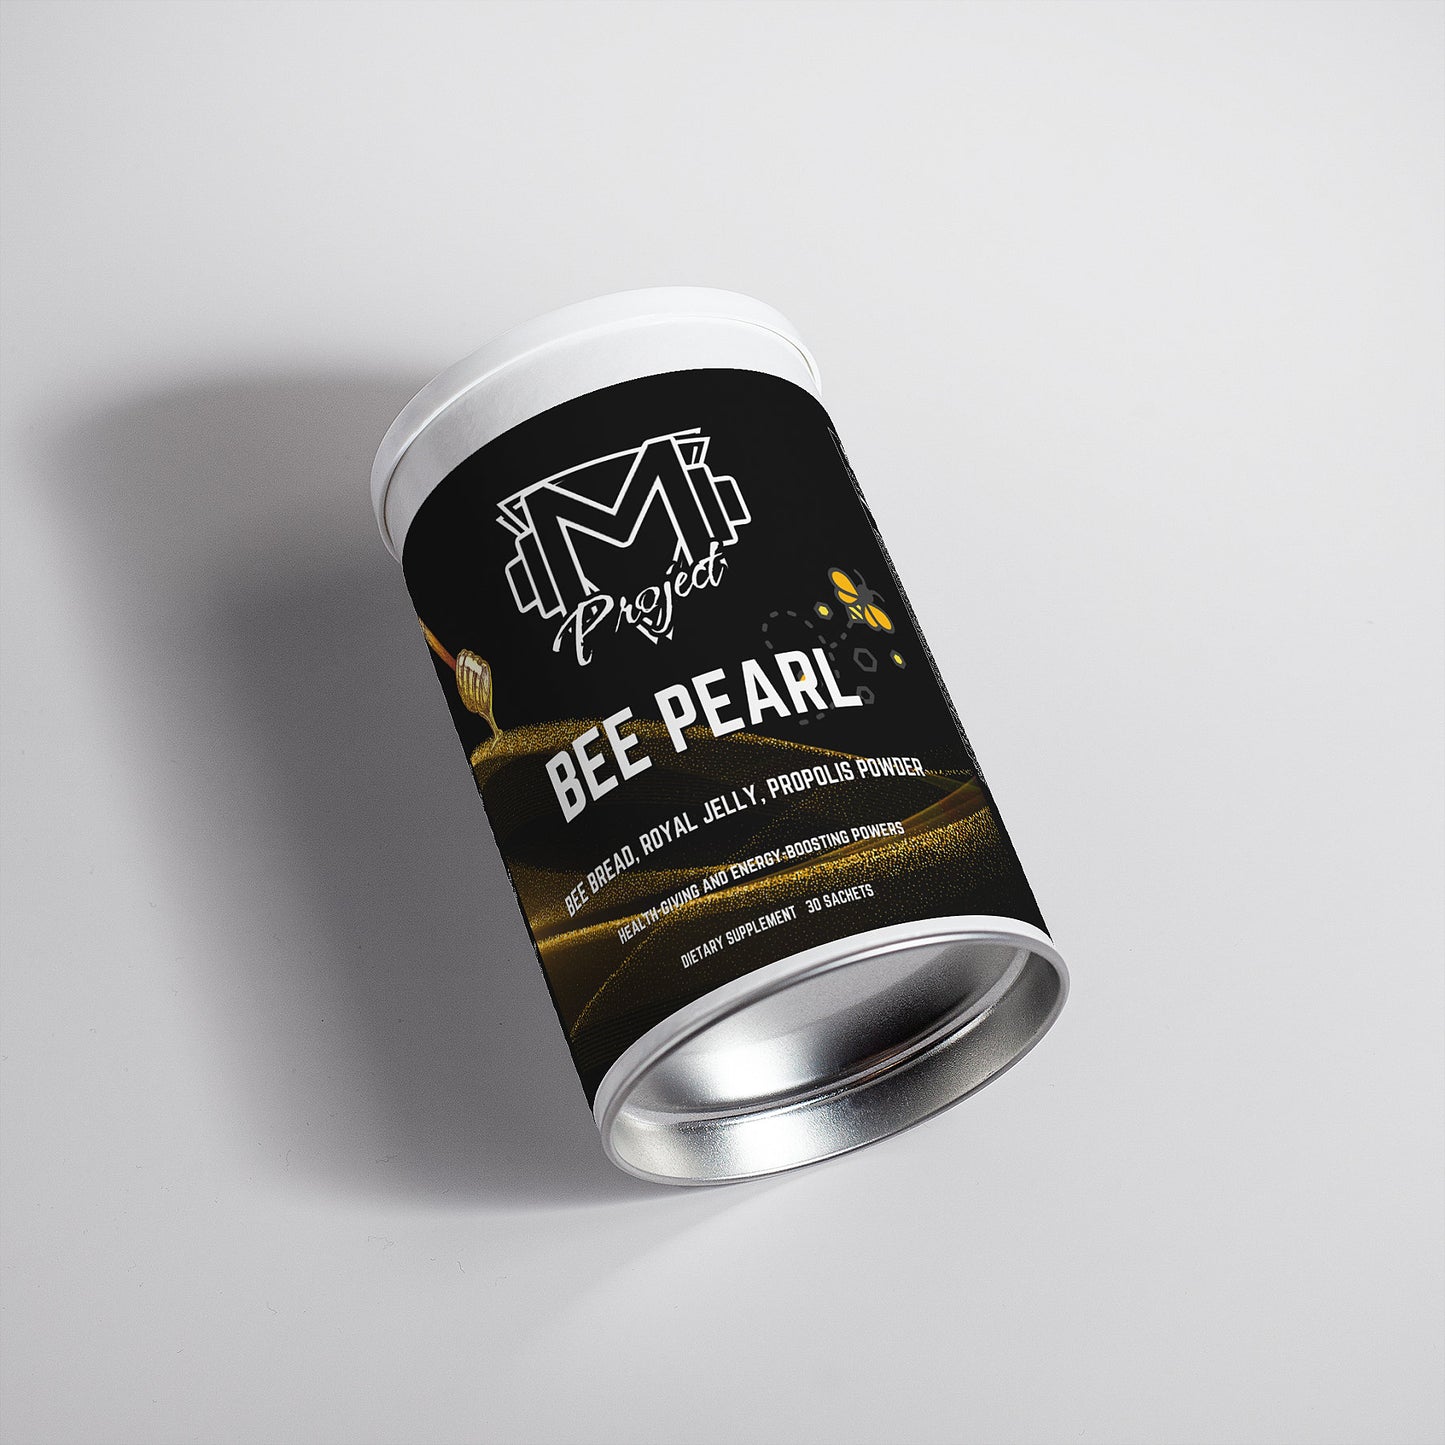 Bee Pearl Powder by Project M